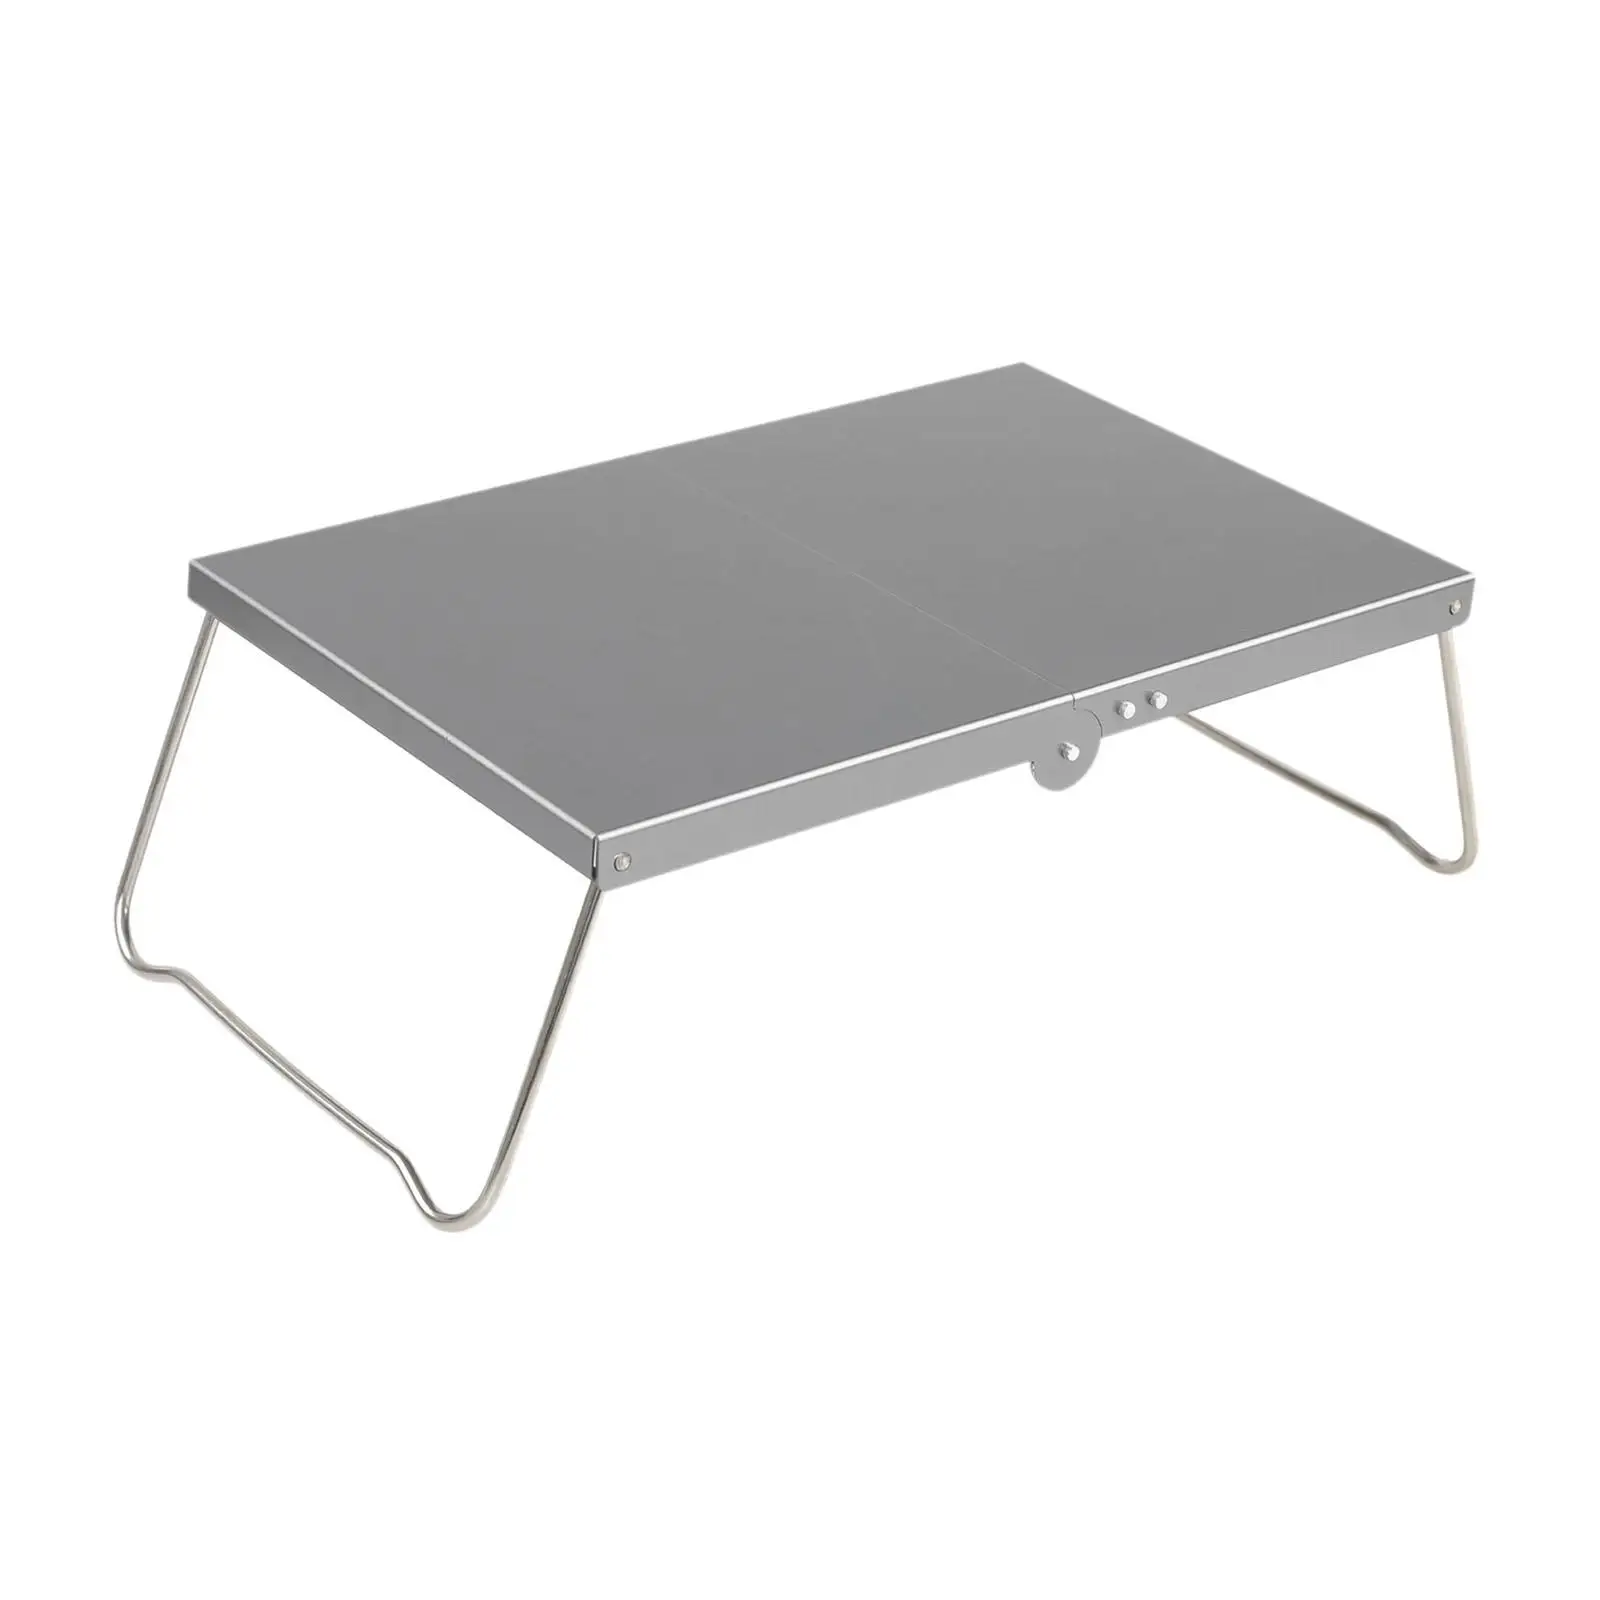 Camping Folding Table Stable Aluminum Alloy for Hiking Backpacking Barbecue